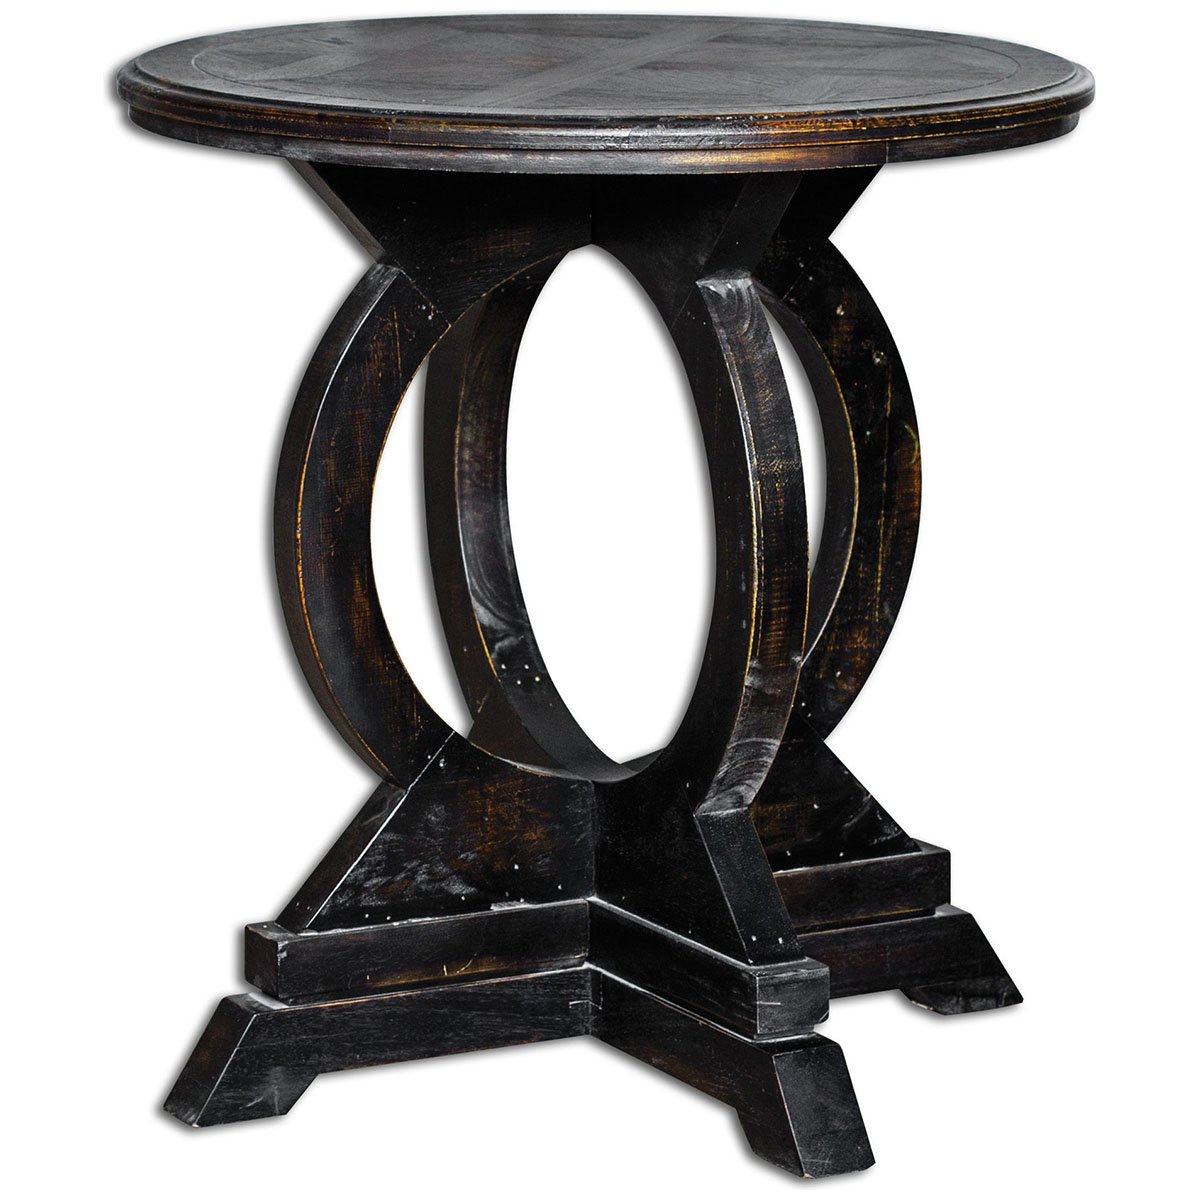 uttermost maiva accent table black kitchen dining tall wood red nautical lamp coffee cover sheesham side accessories small end with attached room sets threshold margate circular